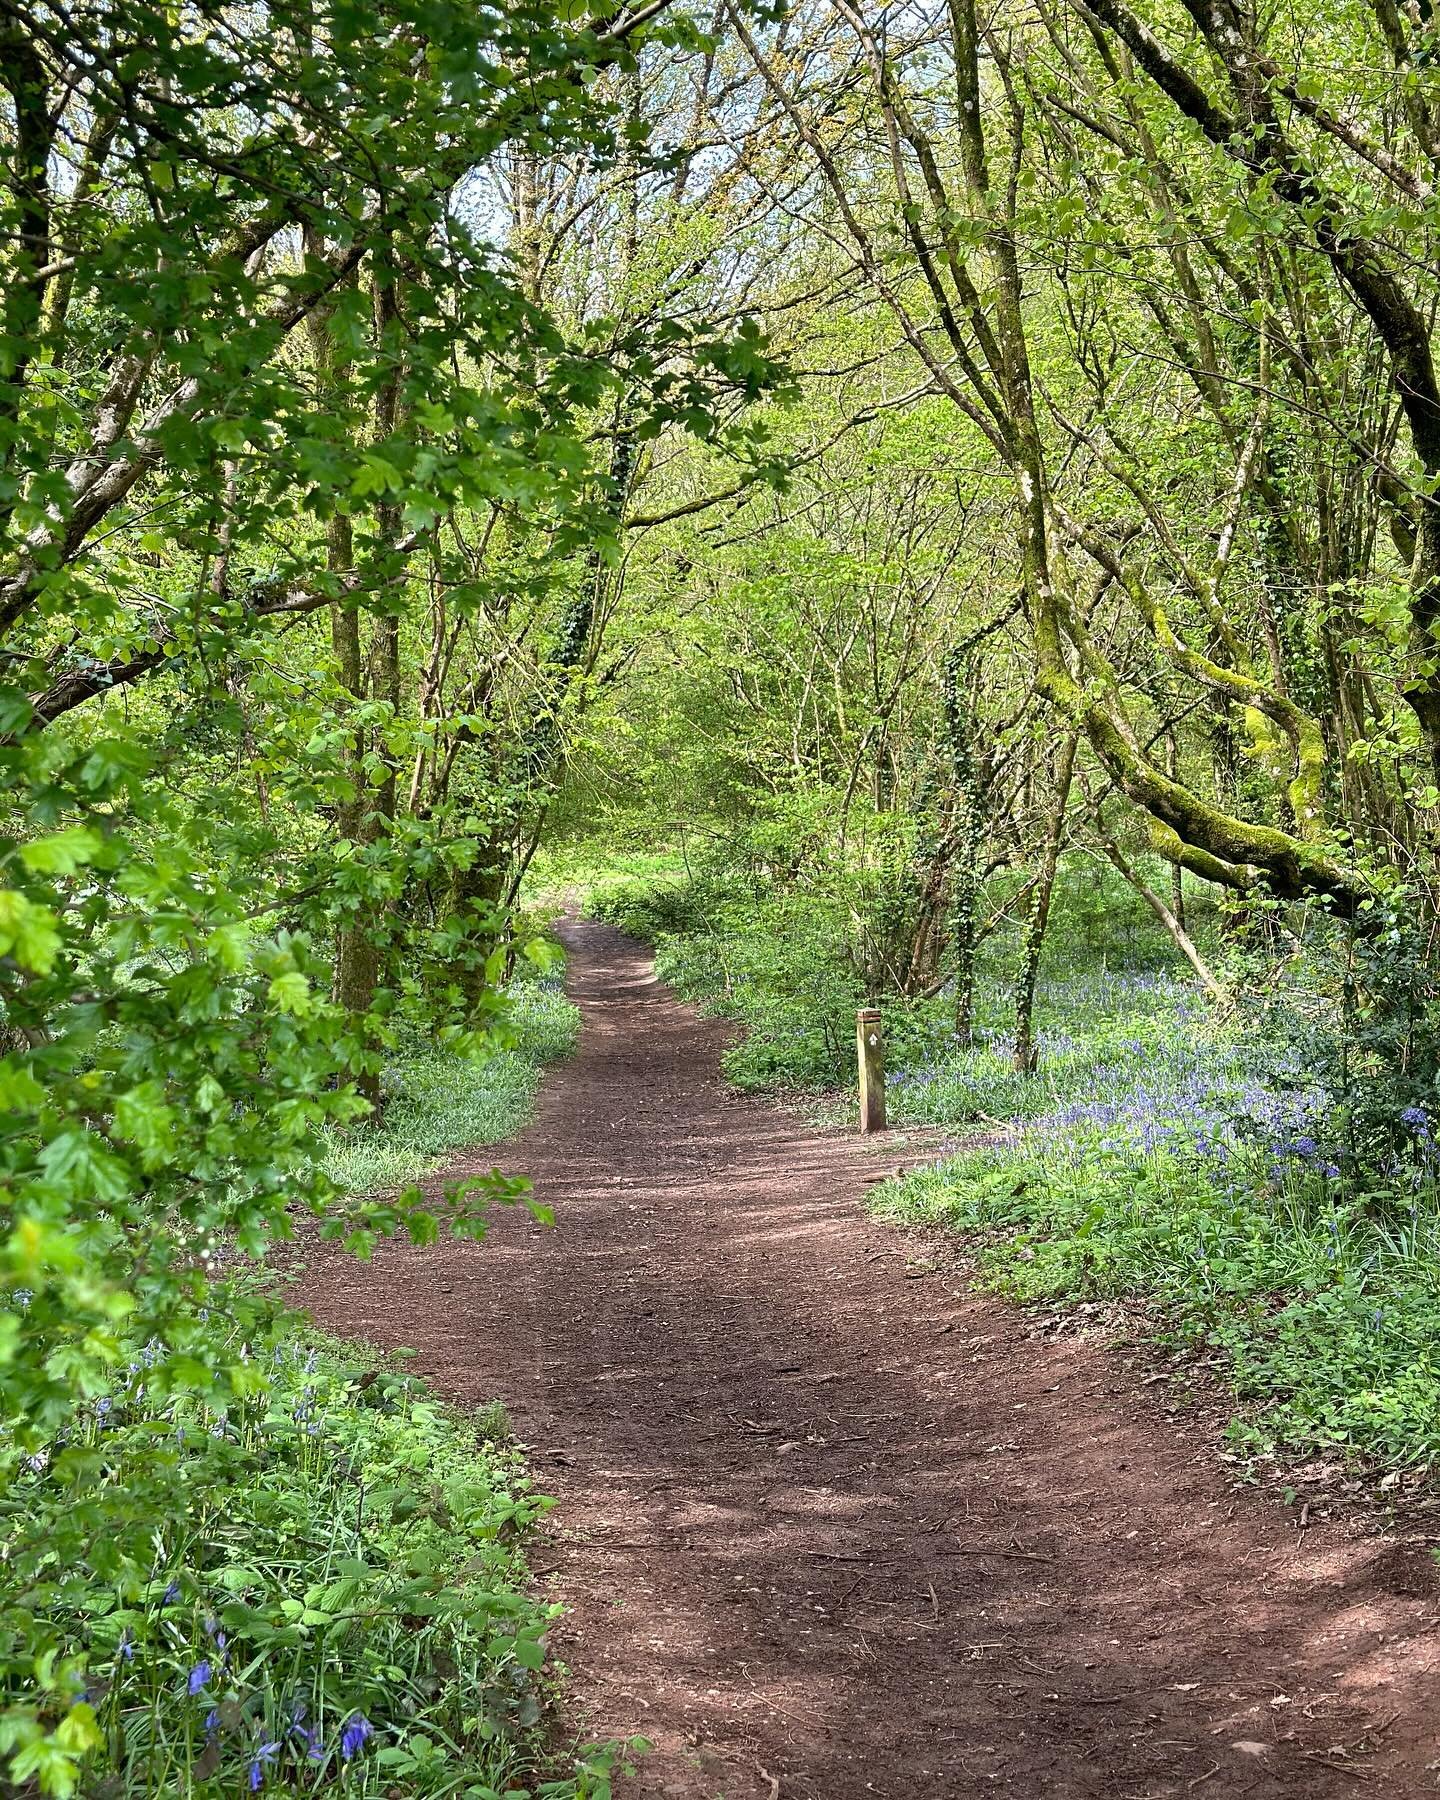 We&rsquo;ve got many woodland walks a stones throw away from our cafe &amp; we are of course dog friendly.

Open 7 days a week serving speciality coffee, fresh pastries, homemade bakes, scones AND our seasonal food menu!